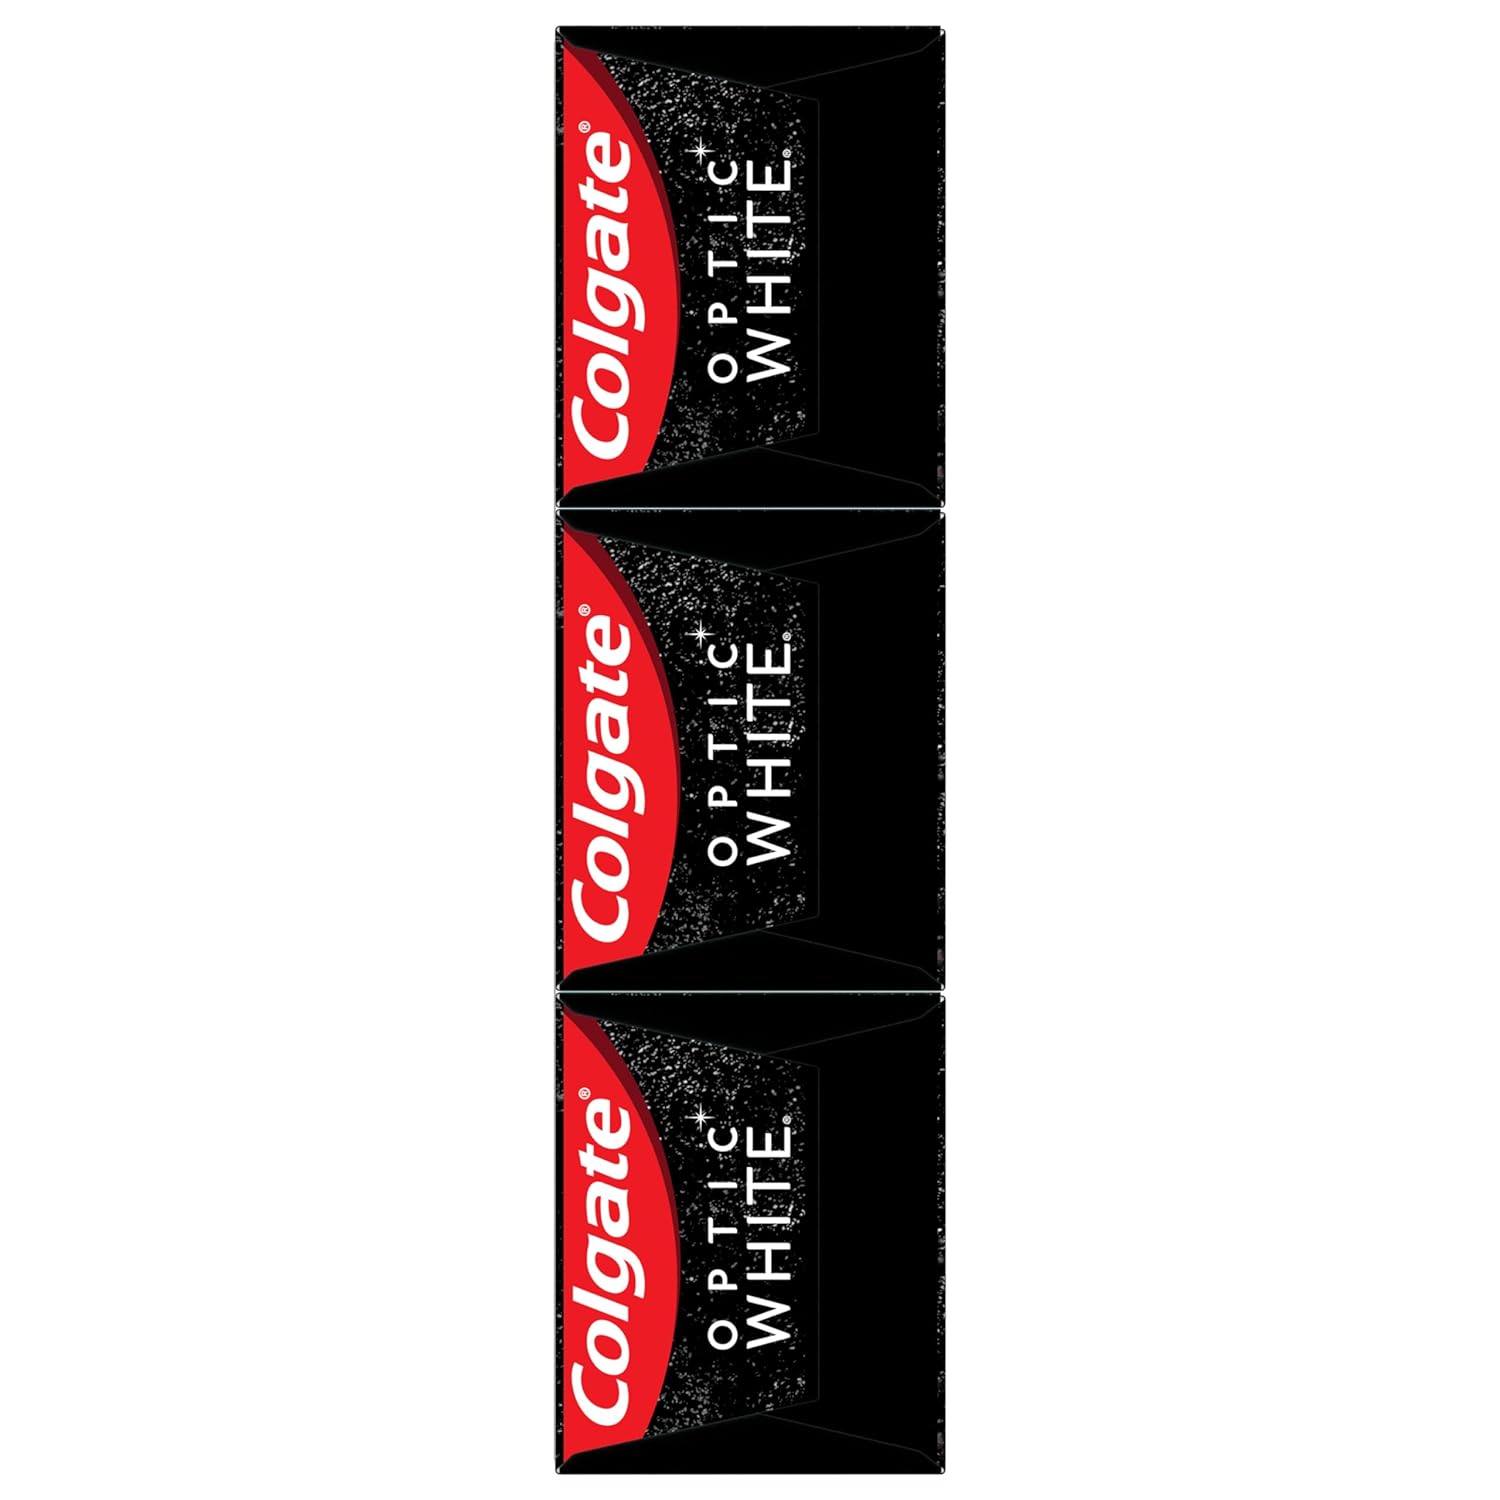 Colgate Optic White with Charcoal Whitening Toothpaste, Cool Mint Flavor, Safely Removes Surface Stains, Enamel-Safe for Daily Use, Teeth Whitening Toothpaste with Fluoride, 3 Pack, 4.2 Oz Tube : Health & Household